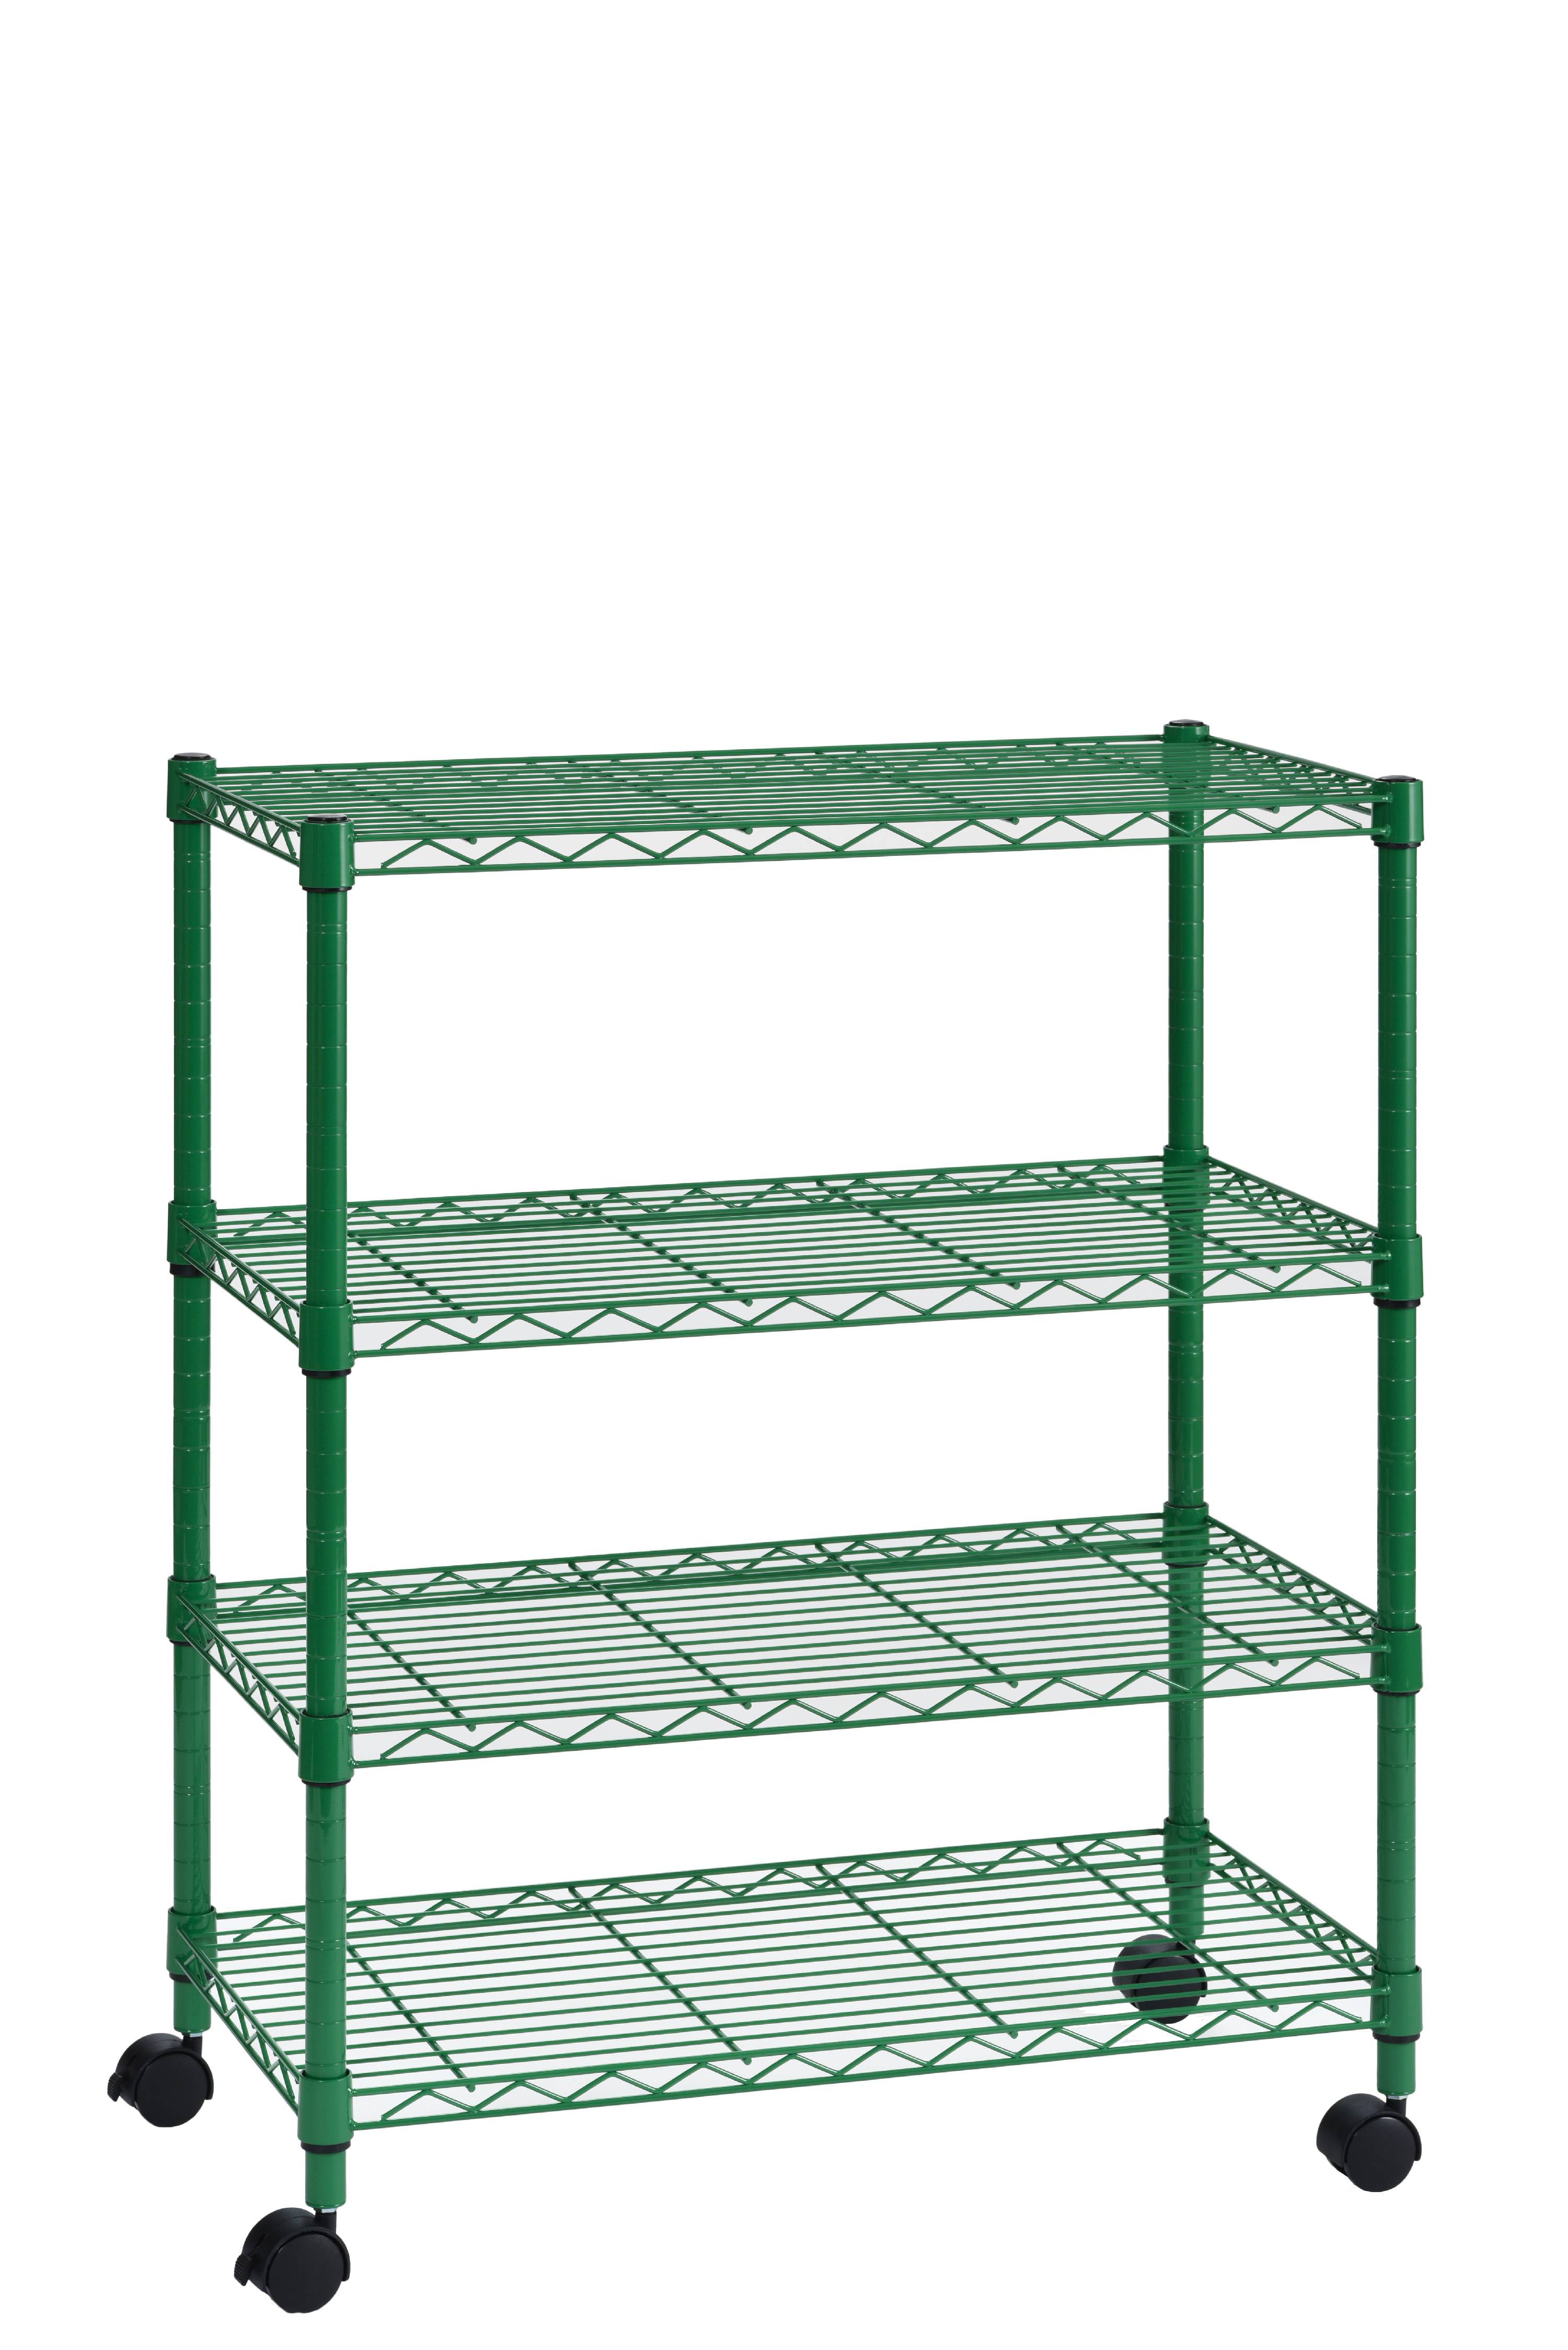 Garage Kitchen Storage Rack Shelves for Home 30 inches x 36 inches NSF Green Epoxy 2 Shelf Kit with 27 inches Posts Office Durable Organizer Living Room Restaurant 